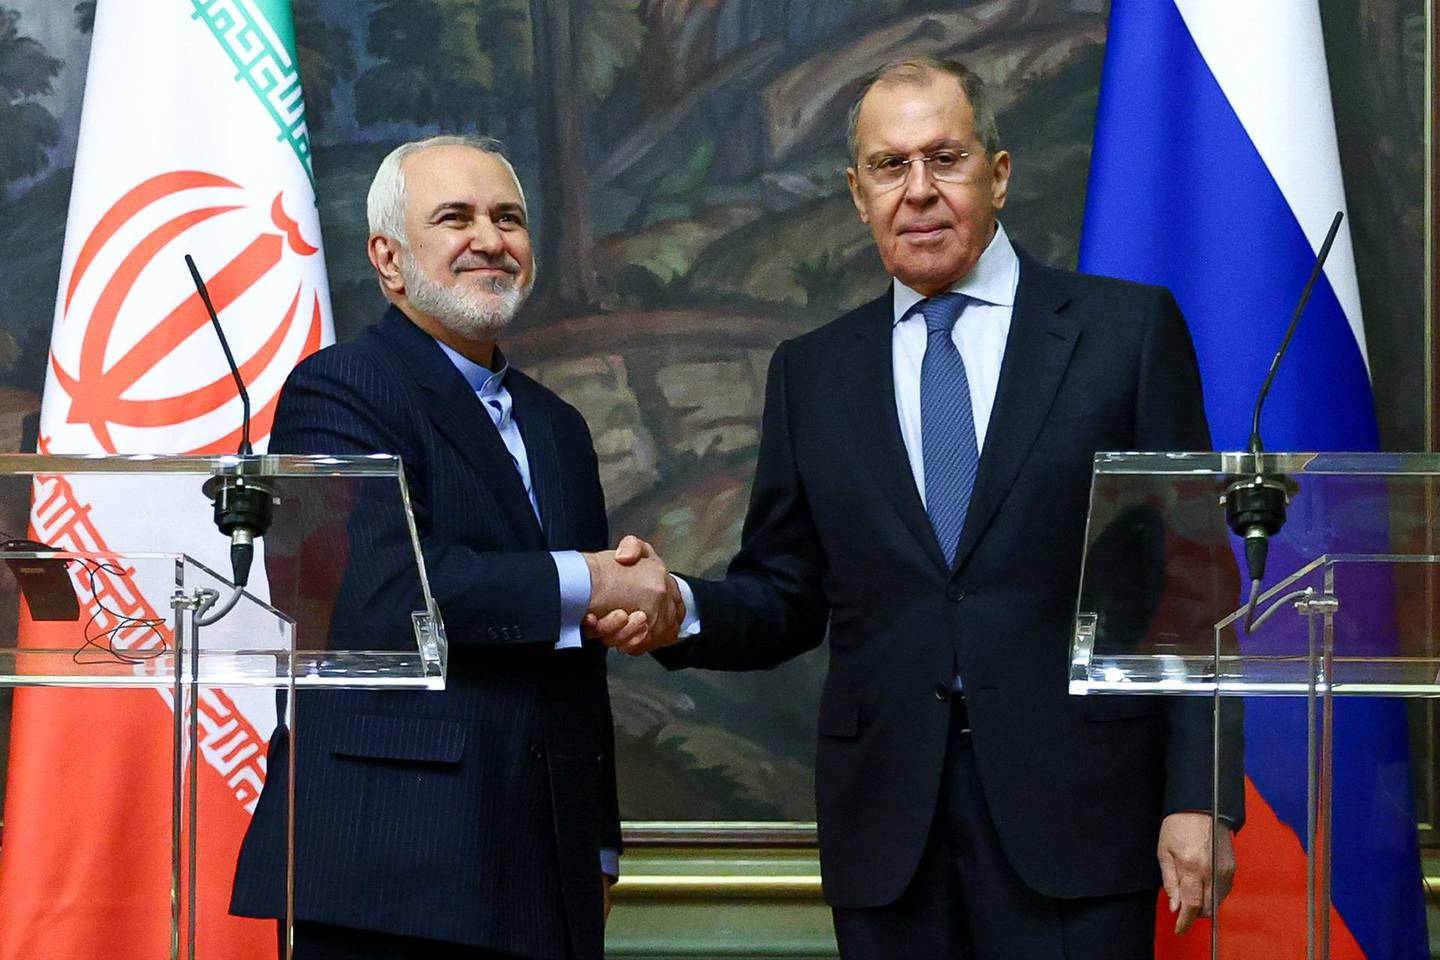 In this handout photo released by Russian Foreign Ministry Press Service, Russian Foreign Minister Sergey Lavrov, right, and Iranian Foreign Minister Mohammad Javad Zarif shake hands after their joint news conference following the talks in Moscow, Russia, Tuesday, Jan. 26, 2021. (Russian Foreign Ministry Press Service via AP)